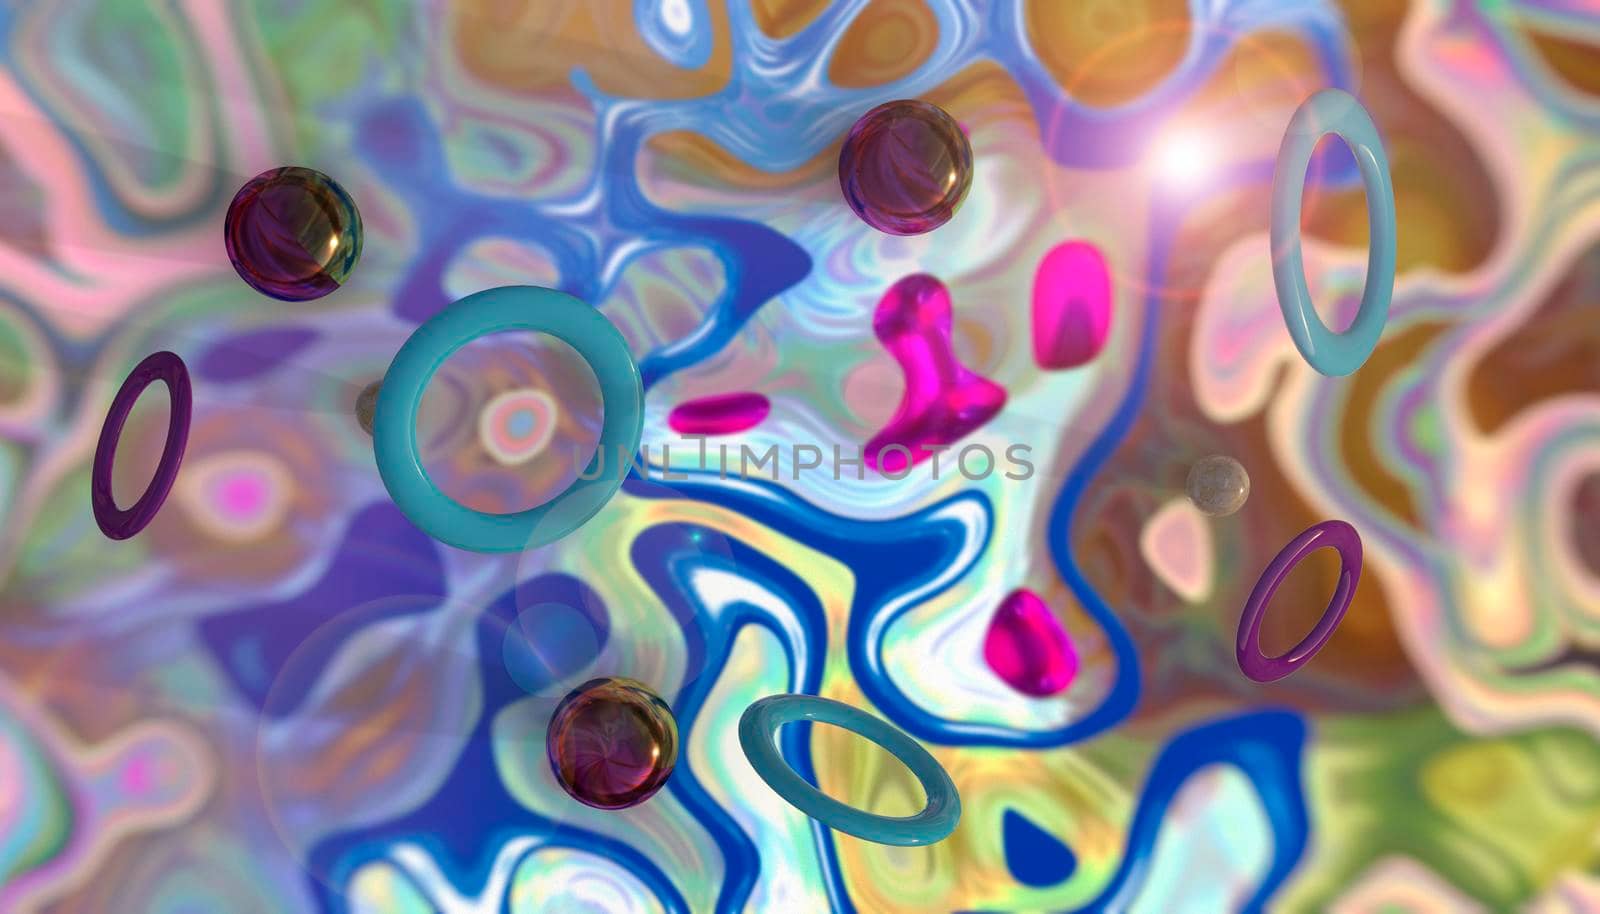 Abstract fantasy background with figures made of glass and plastic. 3d image